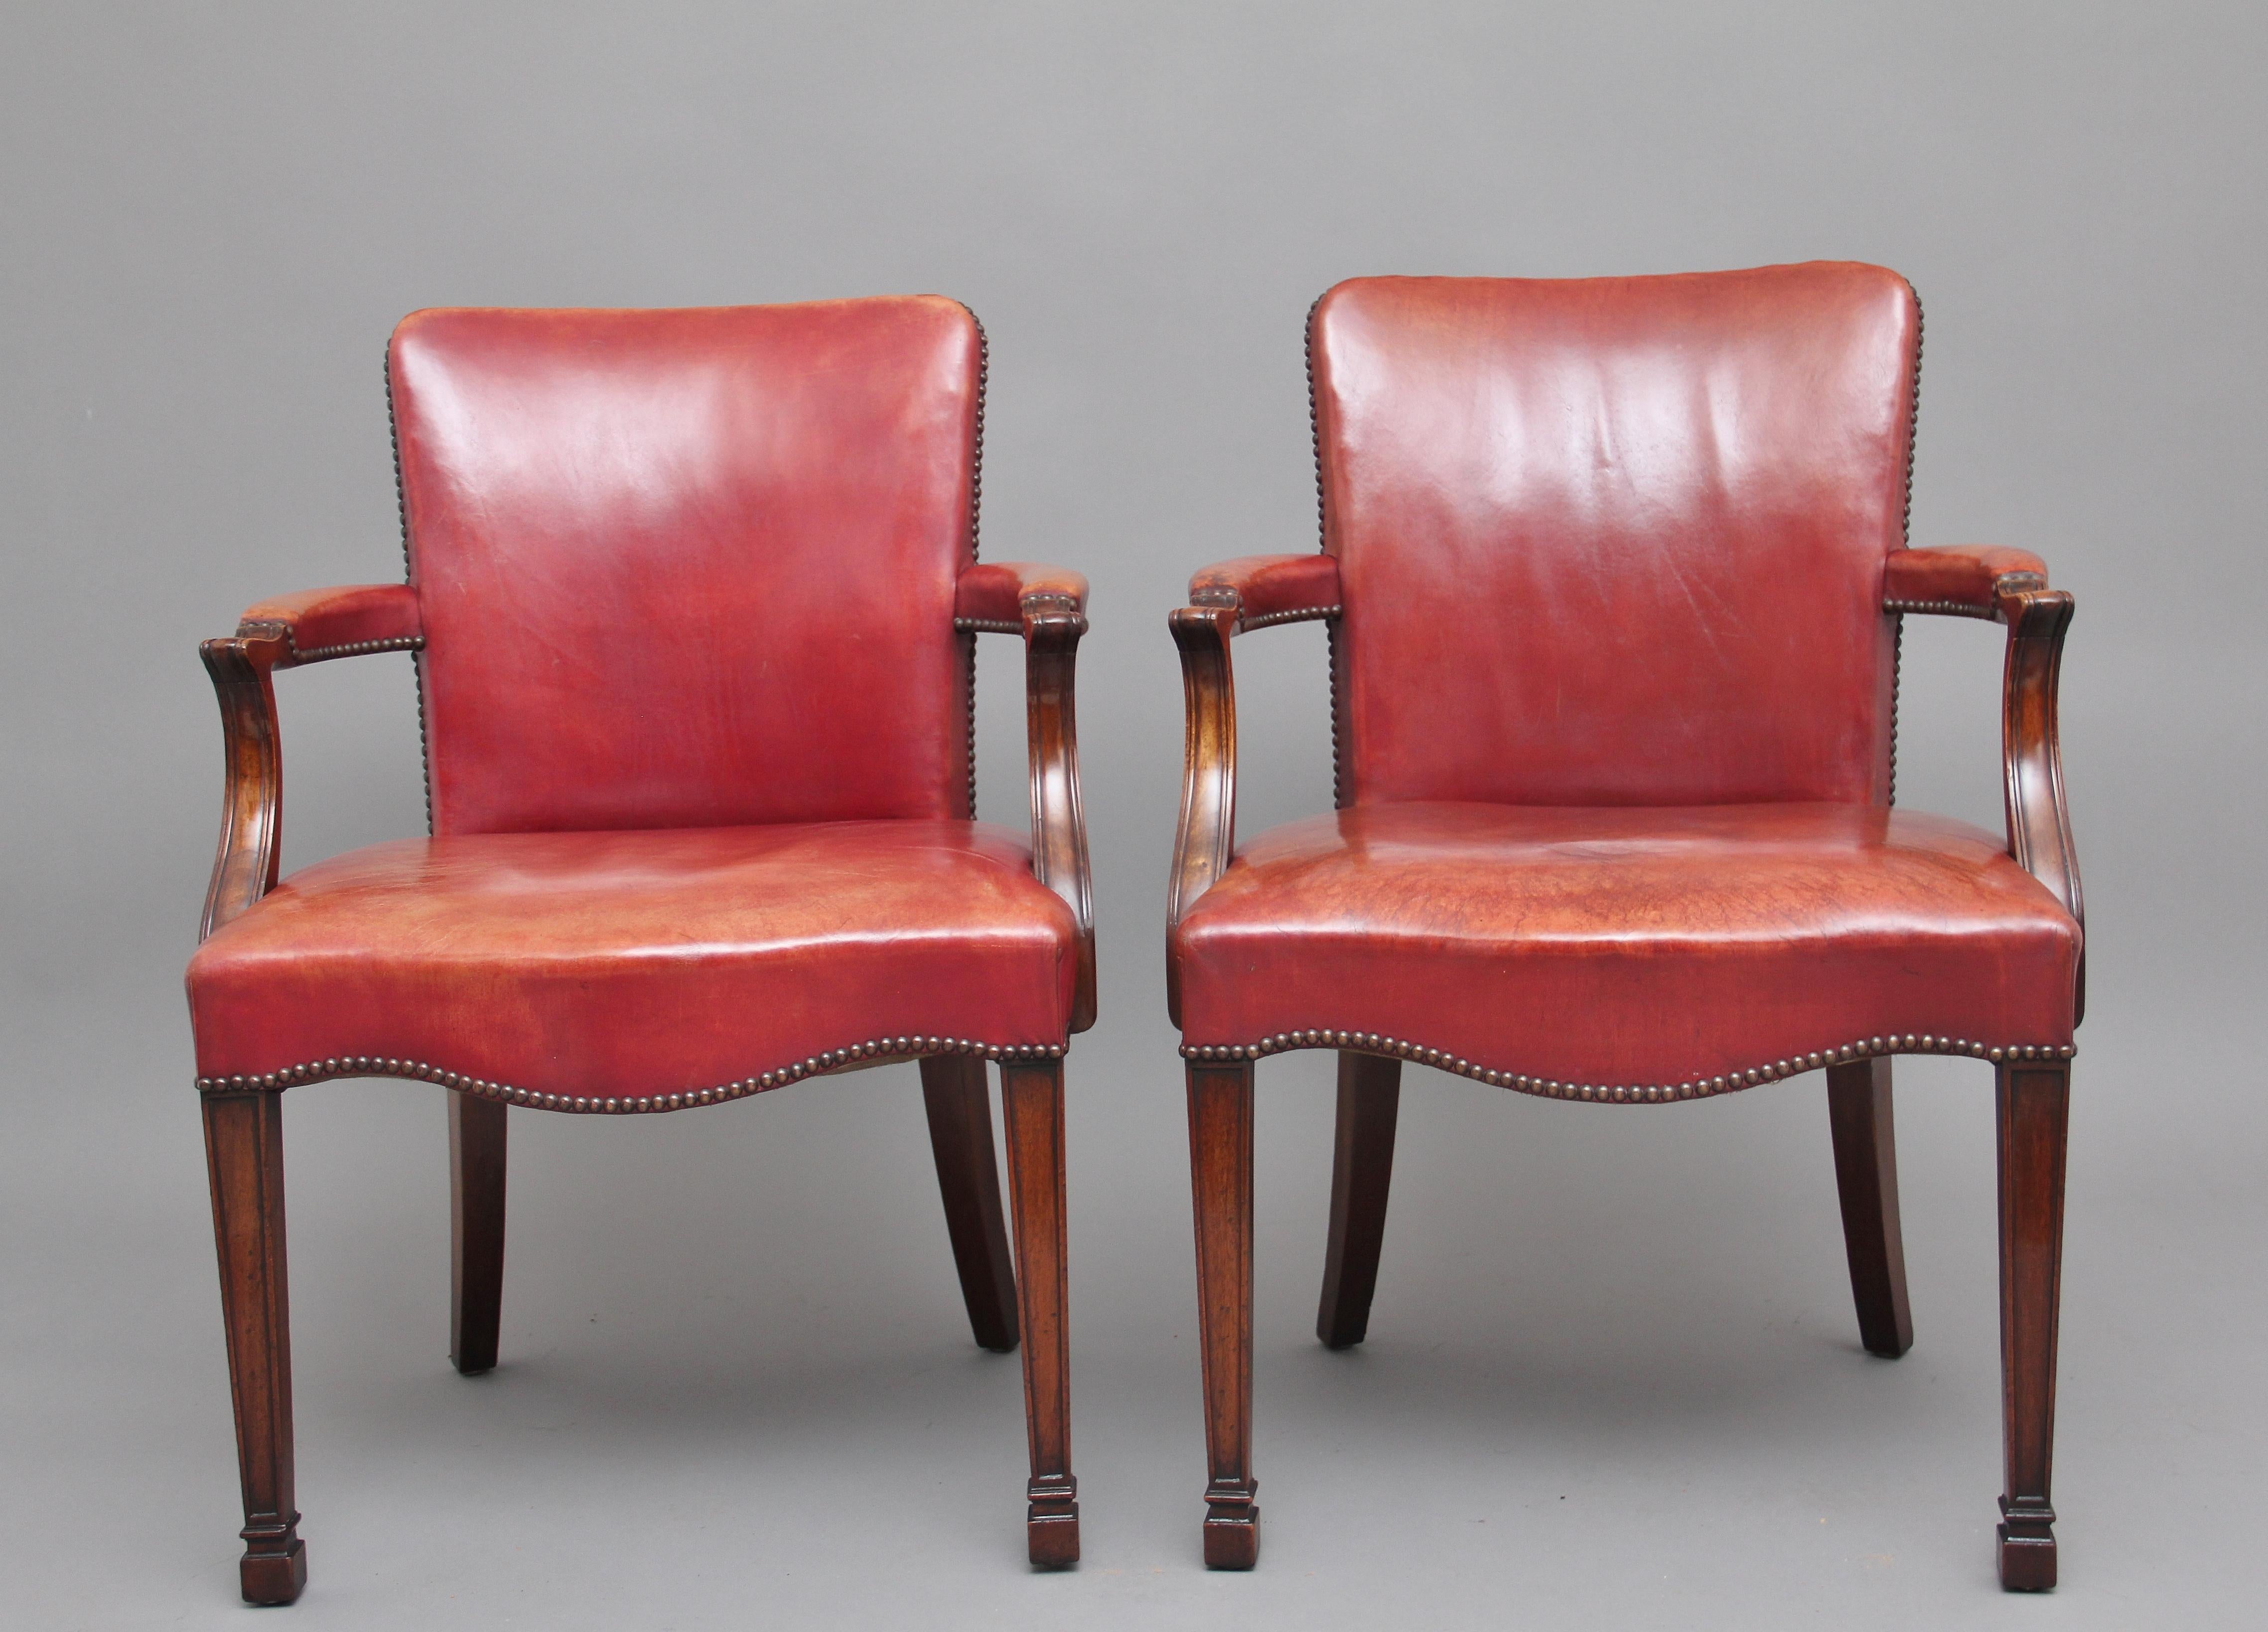 A pair of 19th century mahogany library armchairs upholstered in faded red leather with brass stud decoration, with shaped backs and scrolling arms over serpentine seats, supported on panelled square tapering legs ending in spade feet, circa 1890.